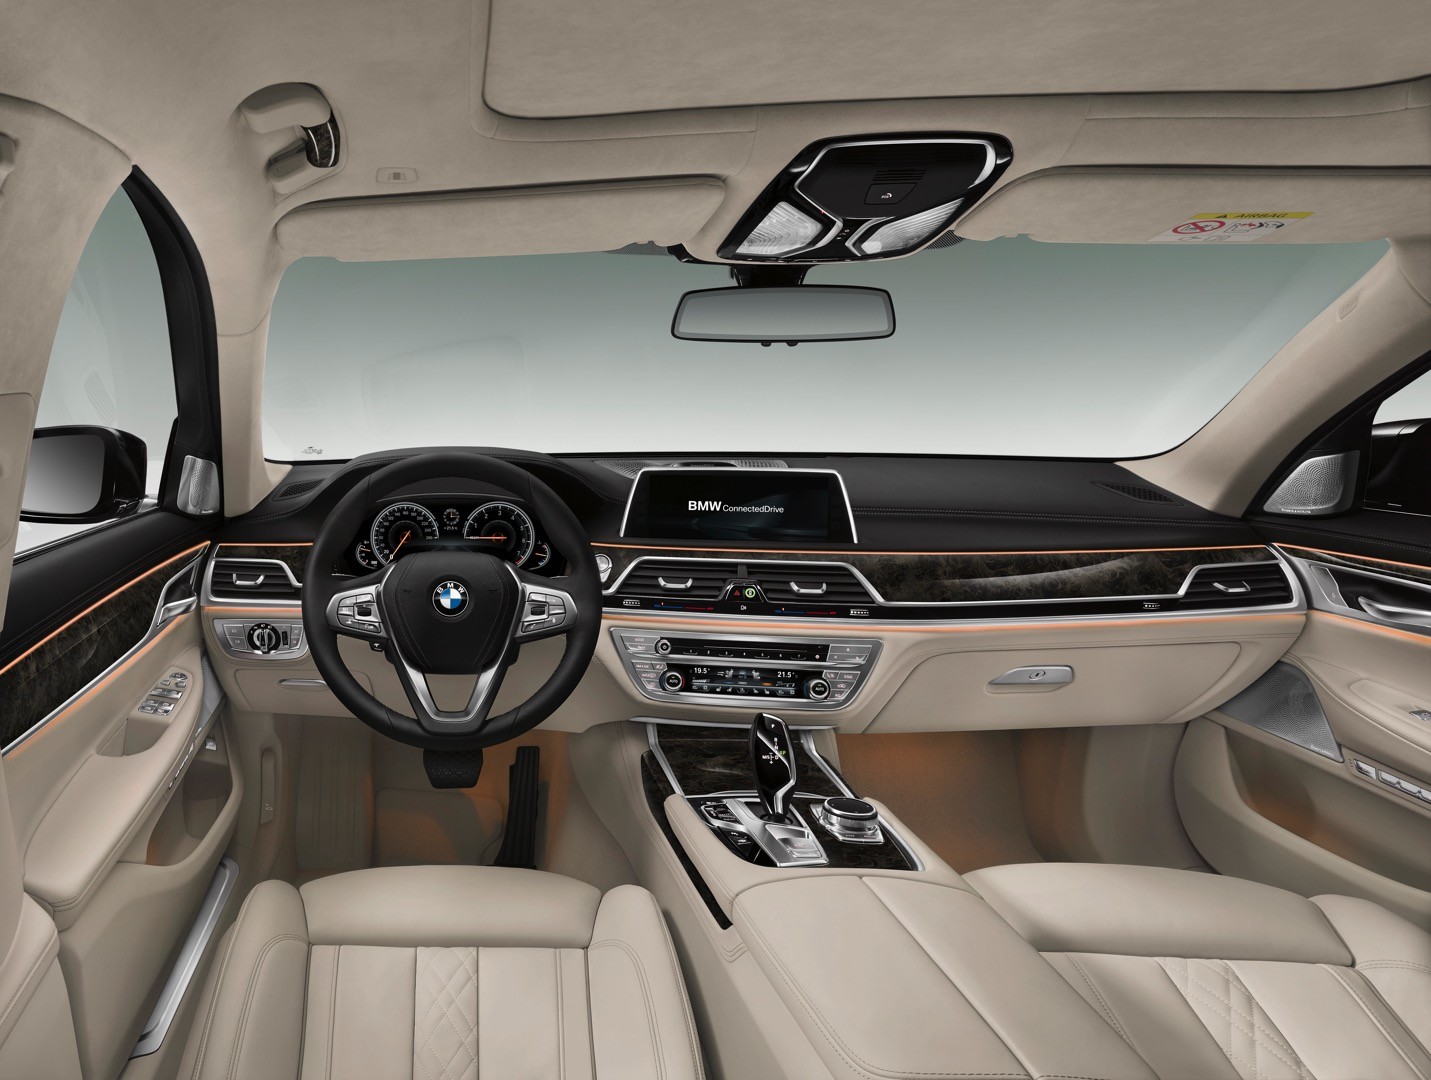 2016-bmw-7-series-finally-officially-unveiled-the-good-stuffs-inside-photo-gallery_111